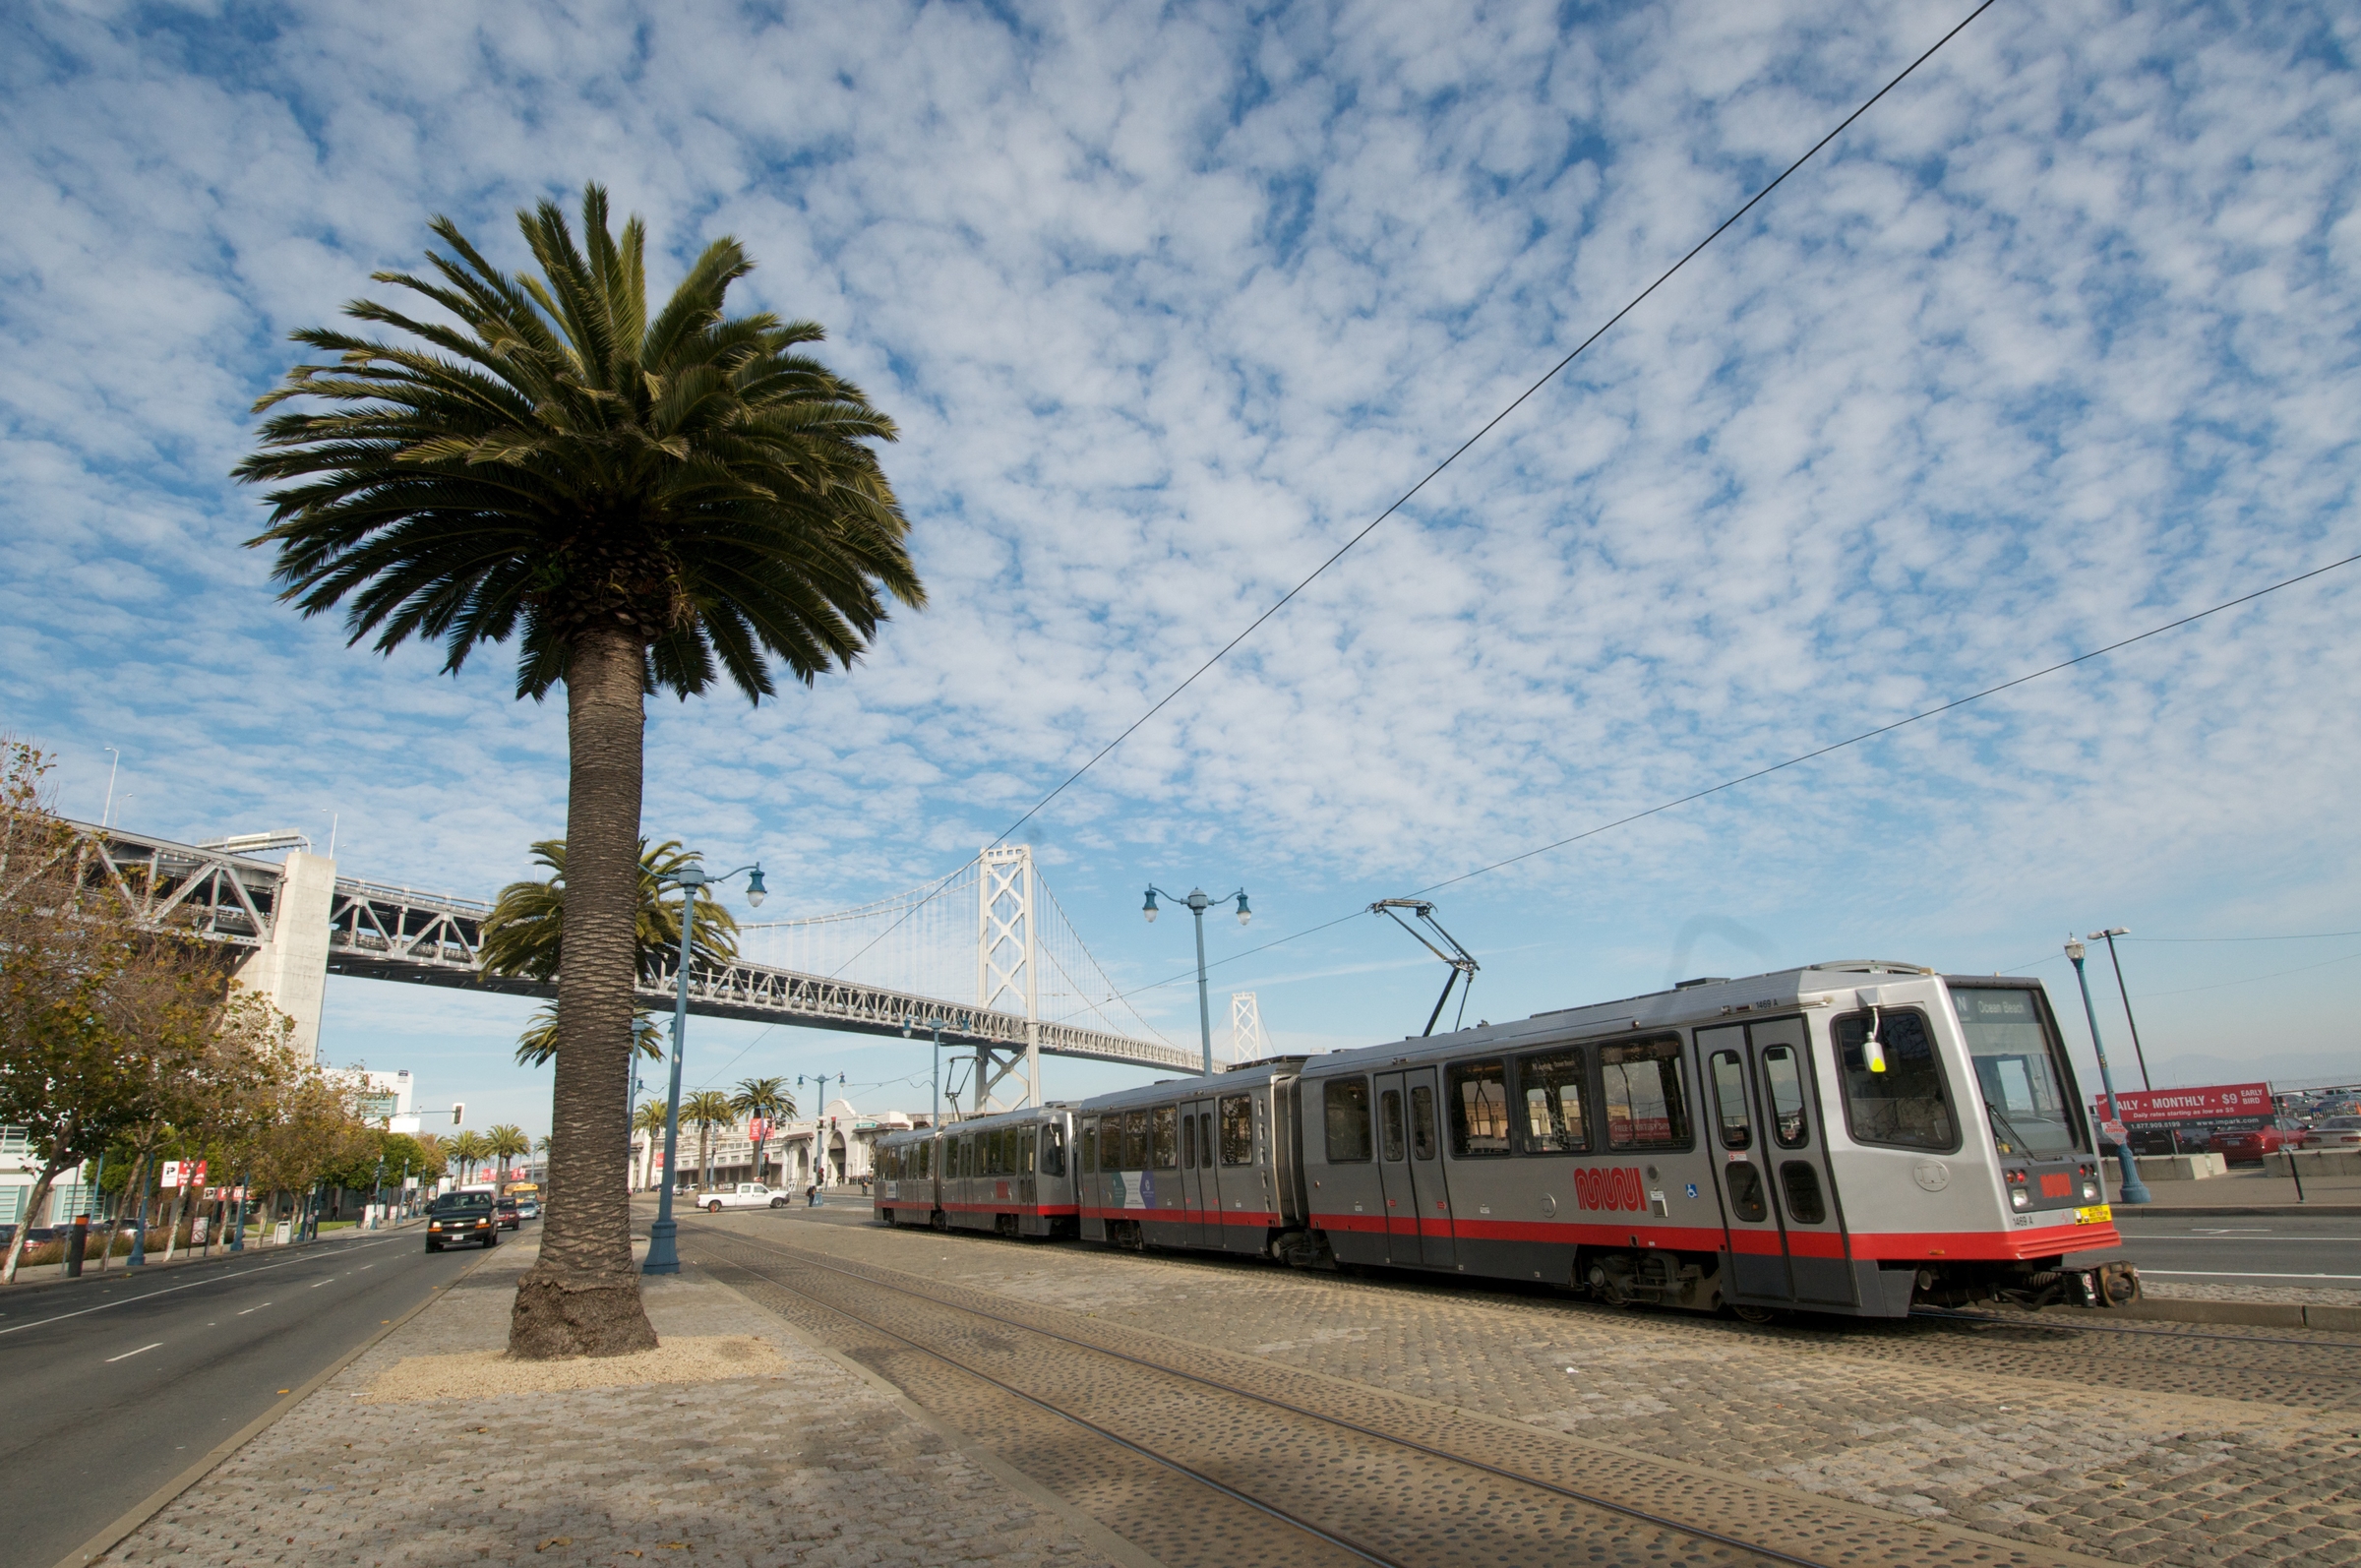 An N Judah light rail train travels north on The Embarcadero with a palm tree on the left and the Bay Bridge in the background.